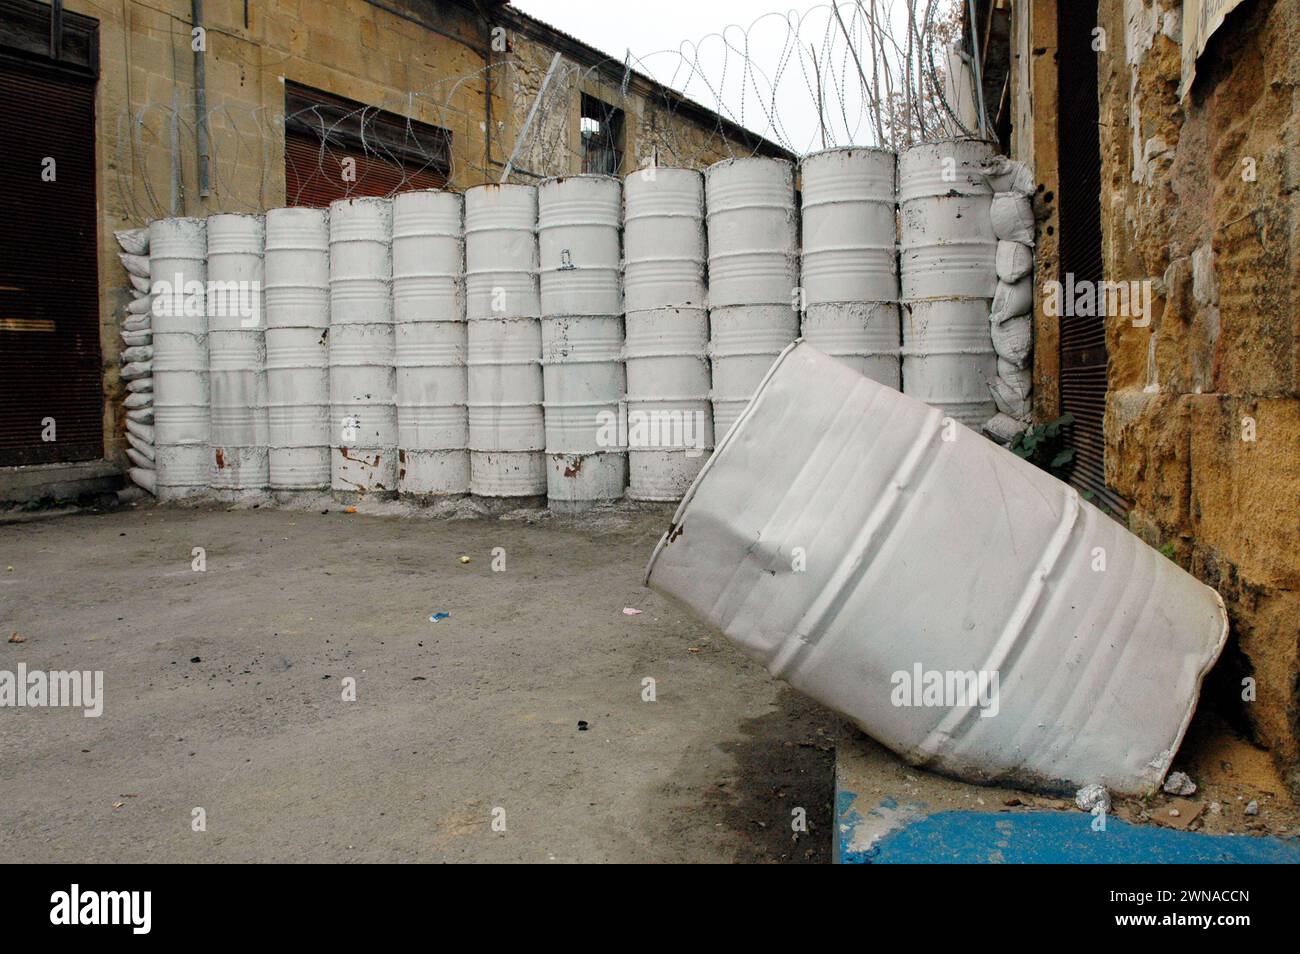 Barricade barrels mark the dividing line between Greek Cypriot and Turkish Cypriot residents of Nicosia. Stock Photo